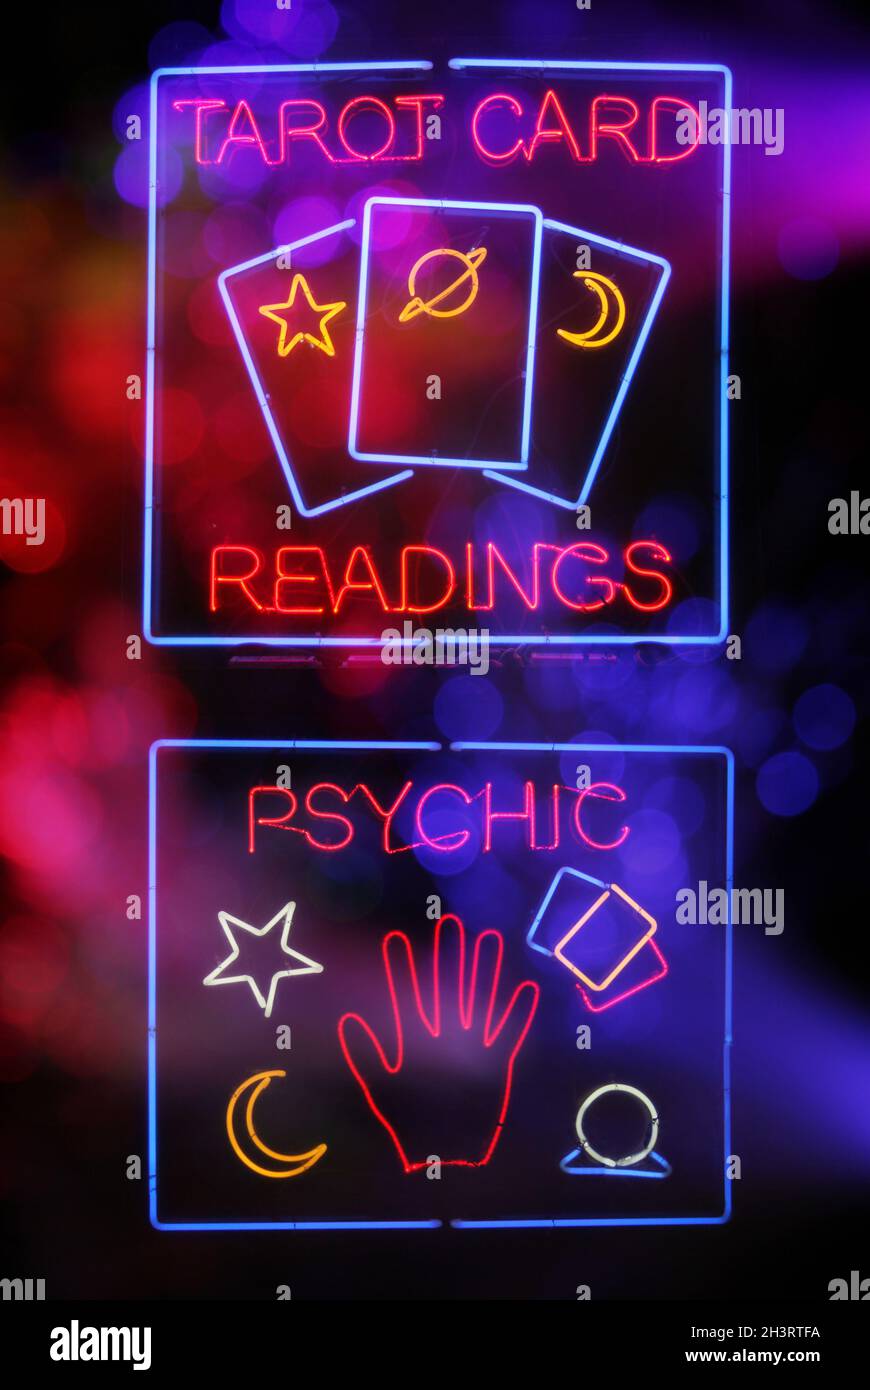 Tarot Card and Psychic Readings Neon Sign Composite Photograph Stock Photo